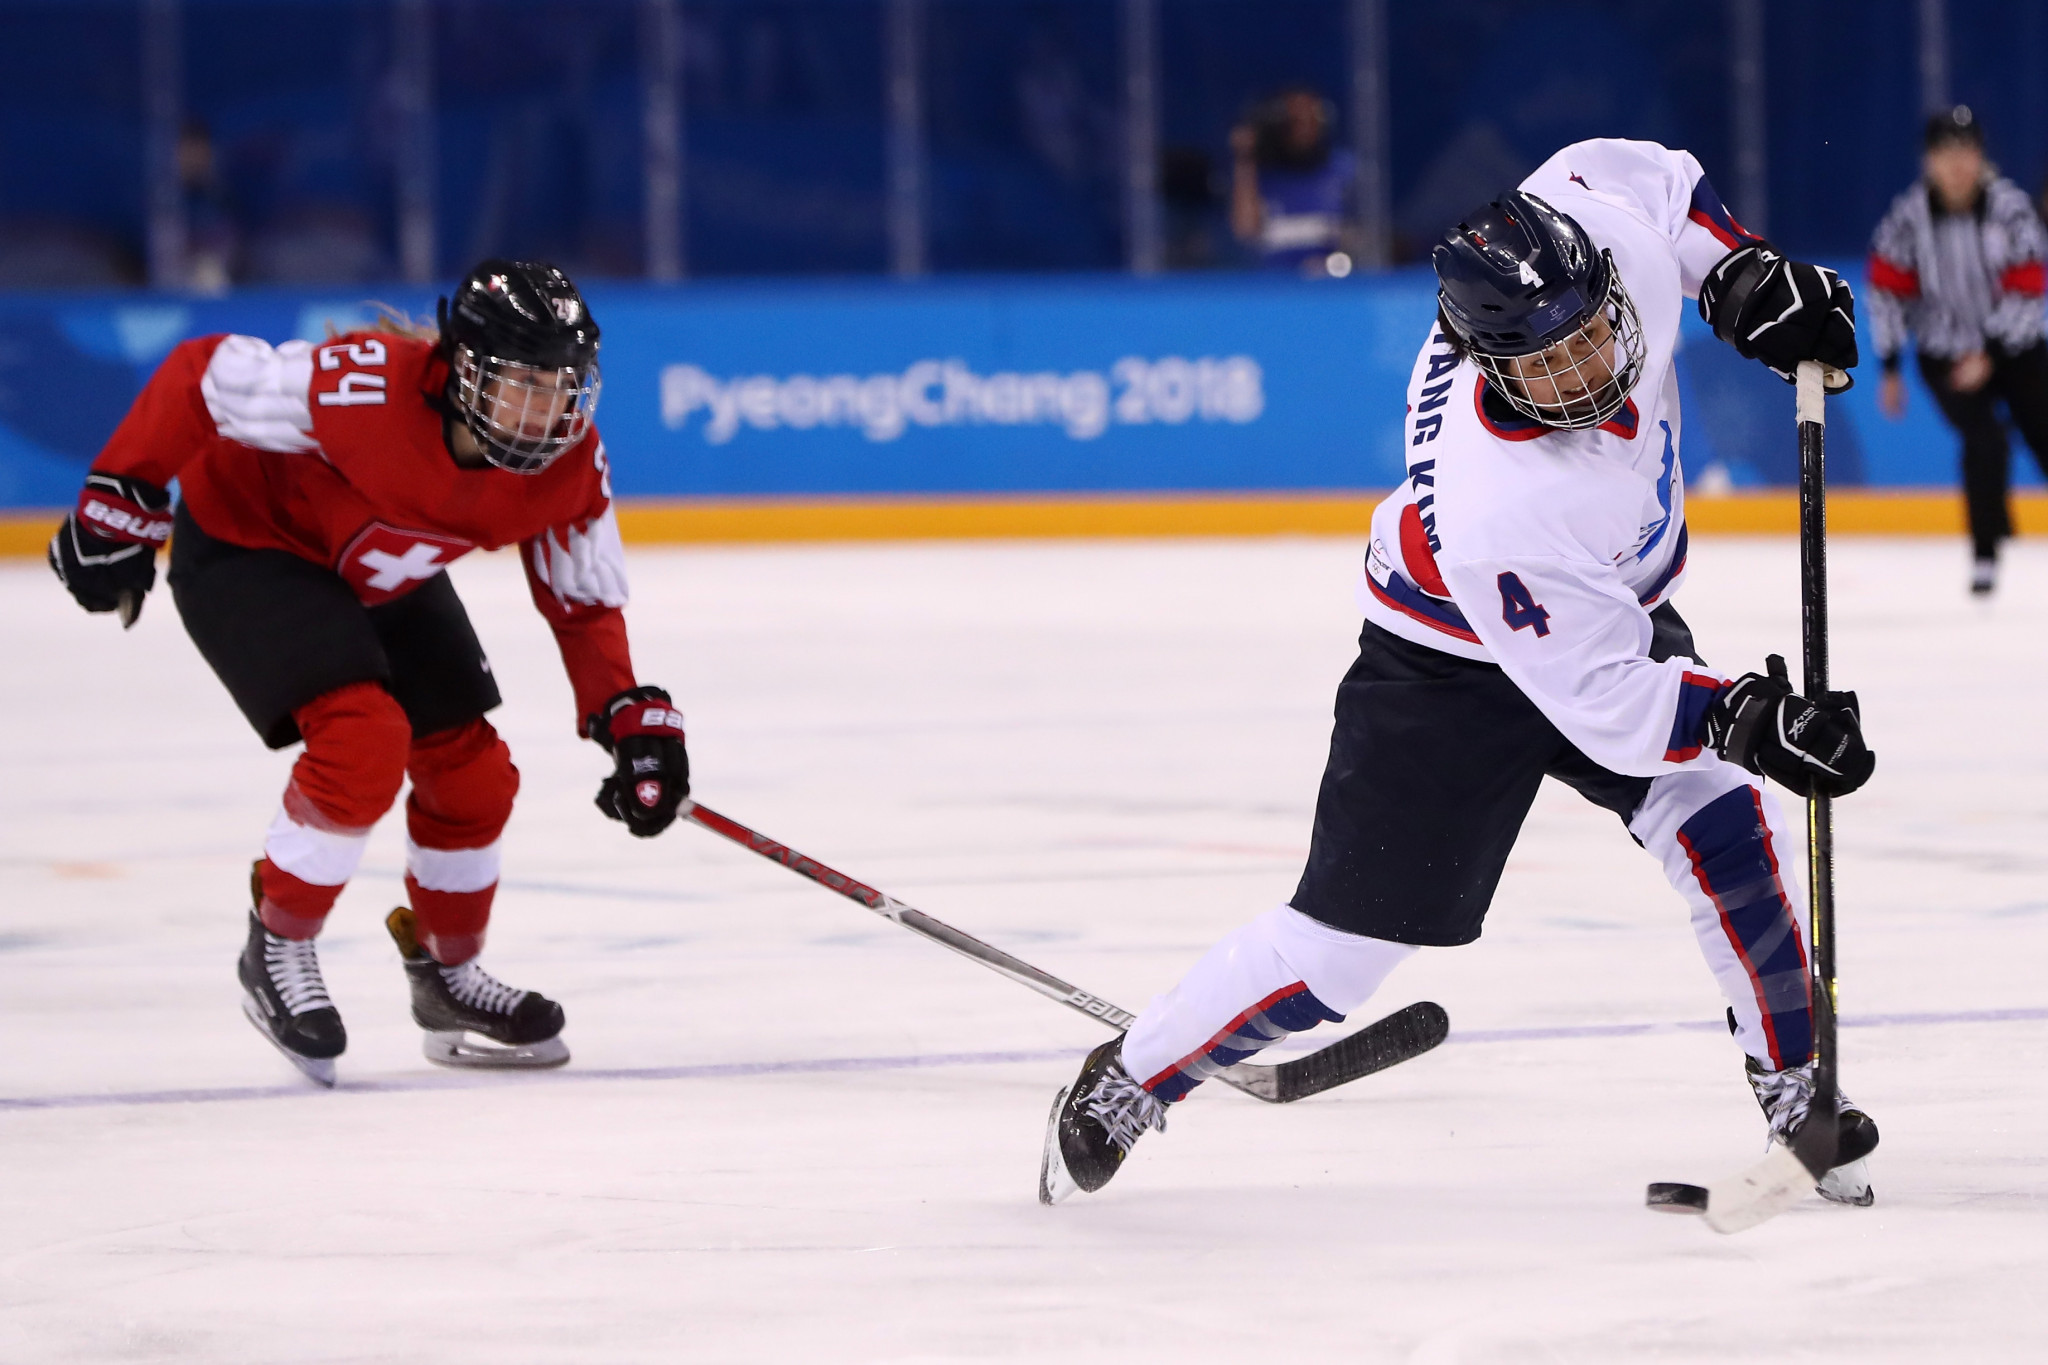 North Korean ice hockey player Un Hyang Kim, right, was secretly cleared after testing positive for a banned substance at Pyeongchang 2018 ©Getty Images